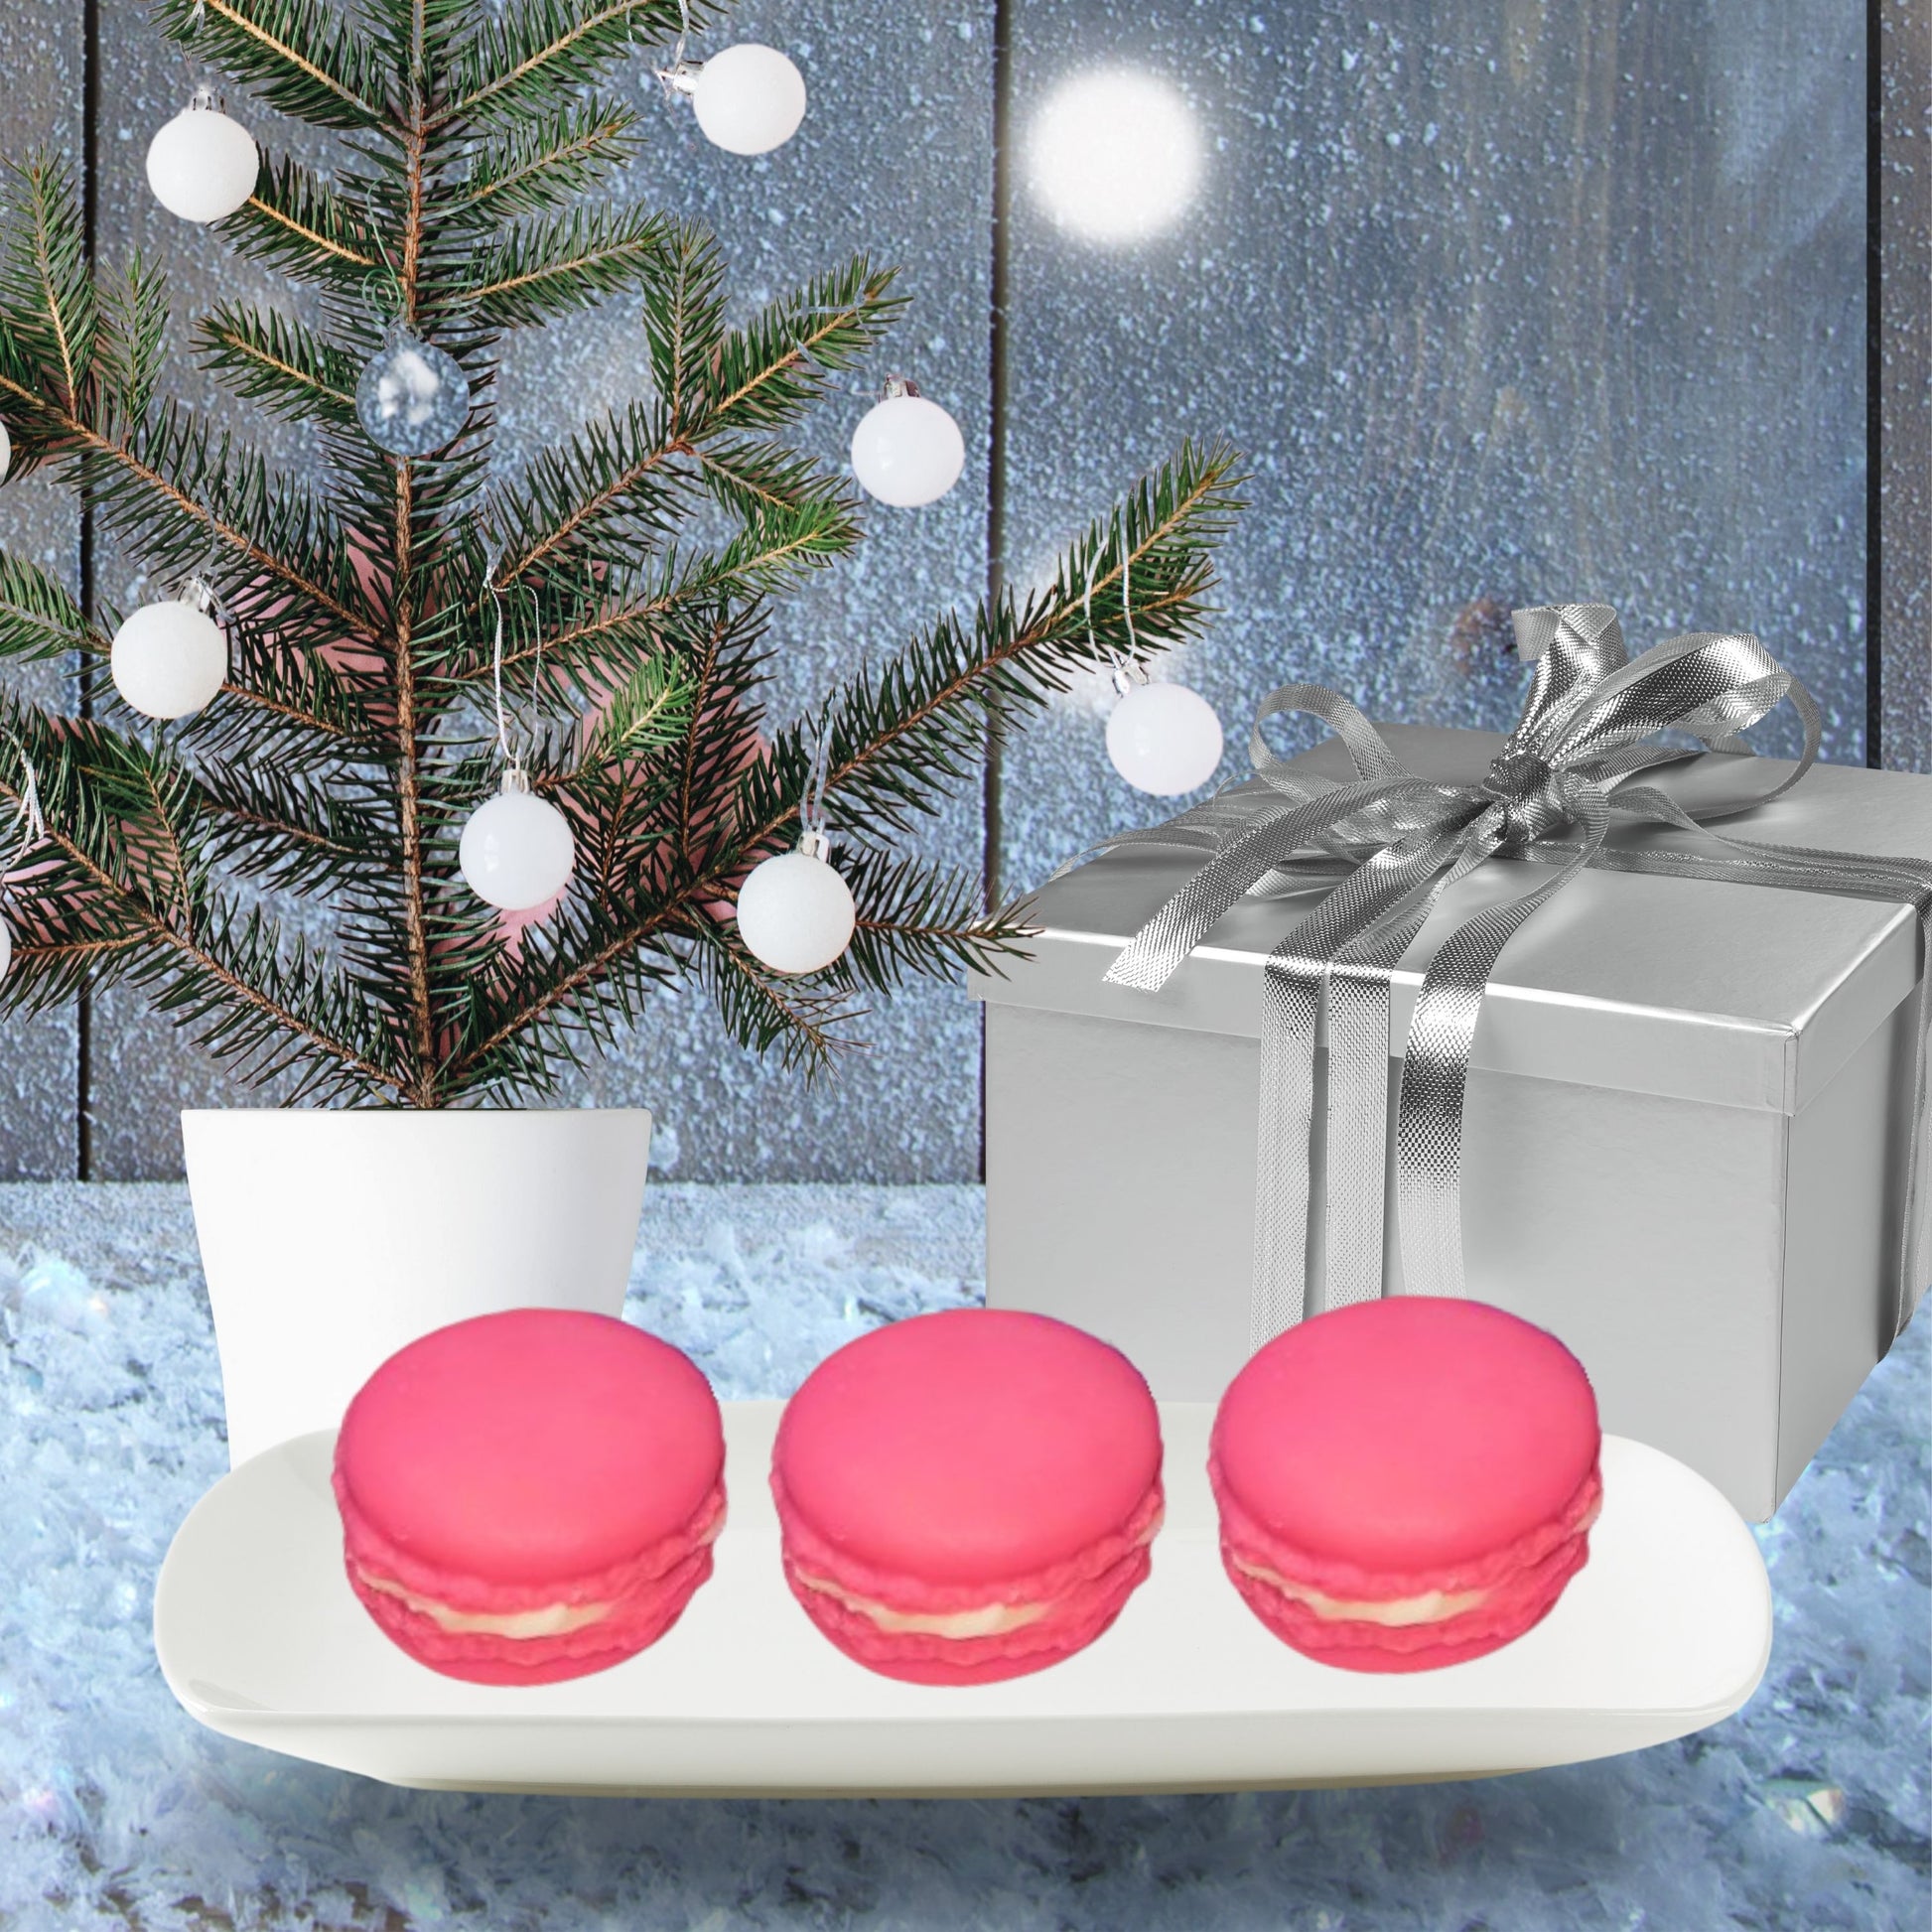 Cafe Delights Mini Macaron Scented Soy Wax Melts